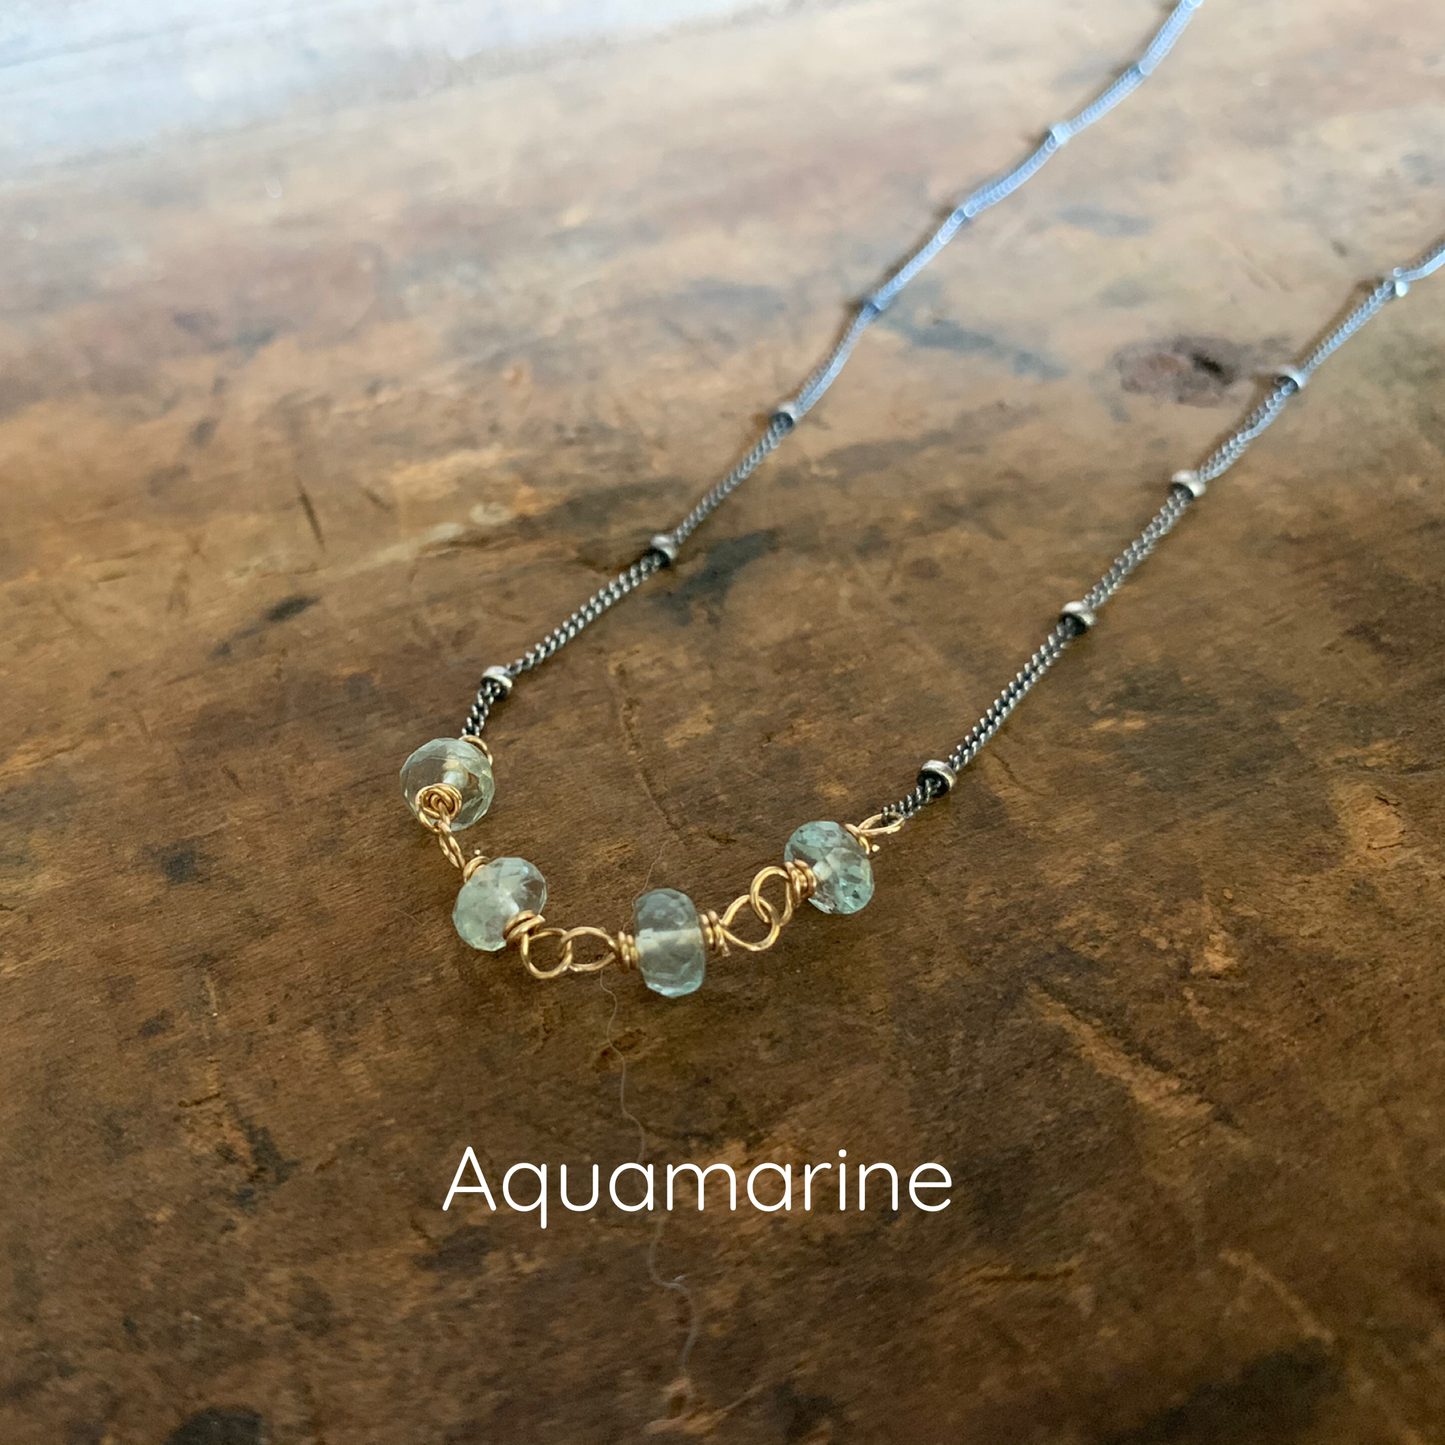 Miscible Collection Necklace - Handmade. Moonstone. Oxidized Sterling silver. 14kt Goldfill. Mixed Metal Necklace